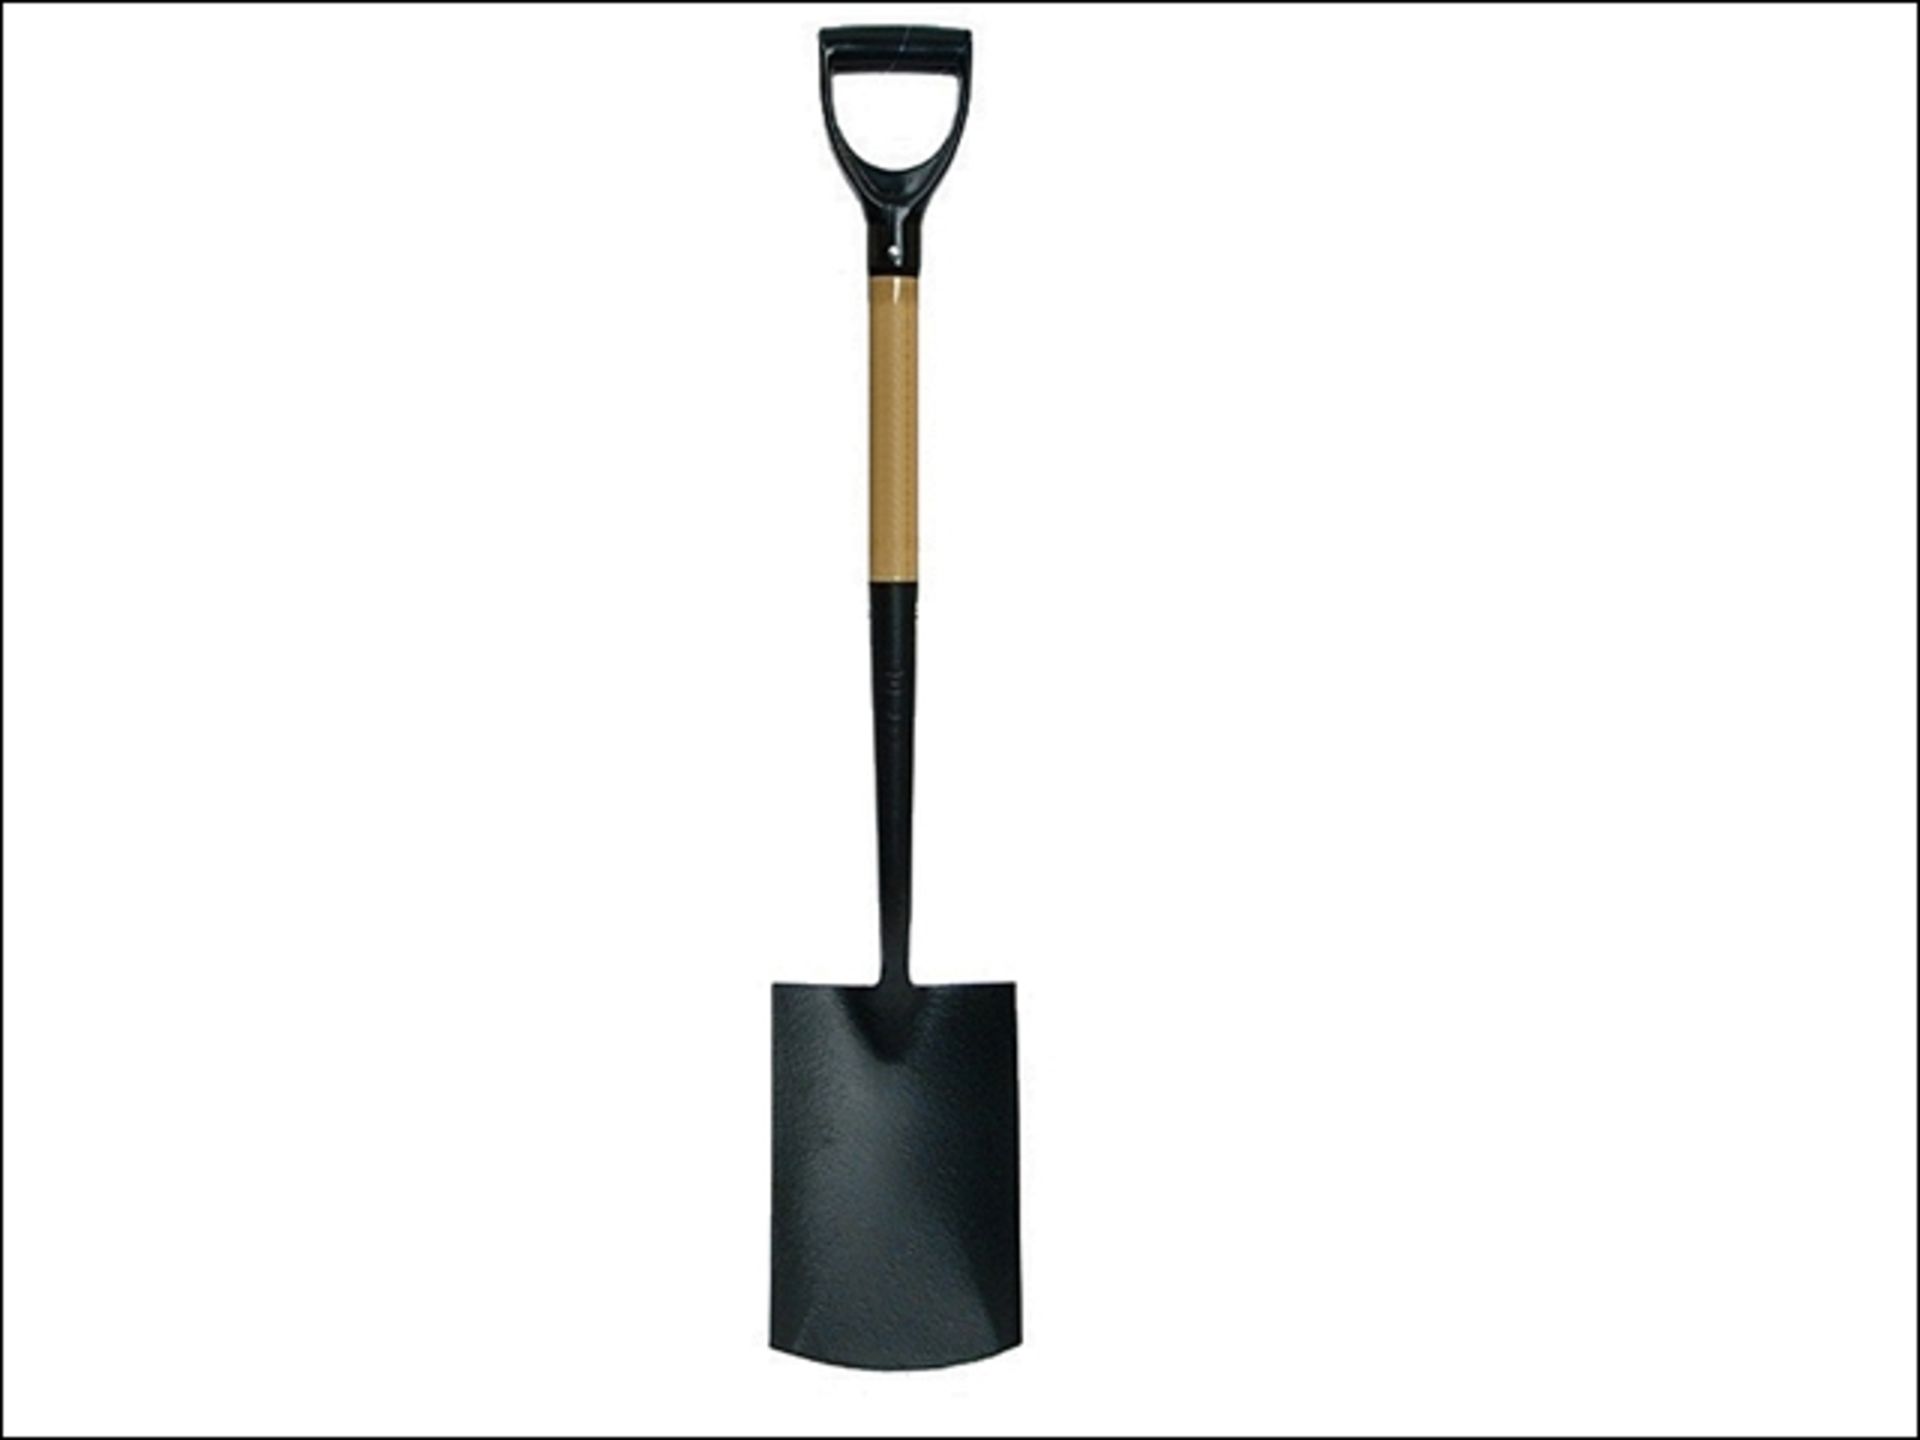 V Brand New Carbon Steel Open Socket Spade With PYD Handle X 2 YOUR BID PRICE TO BE MULTIPLIED BY